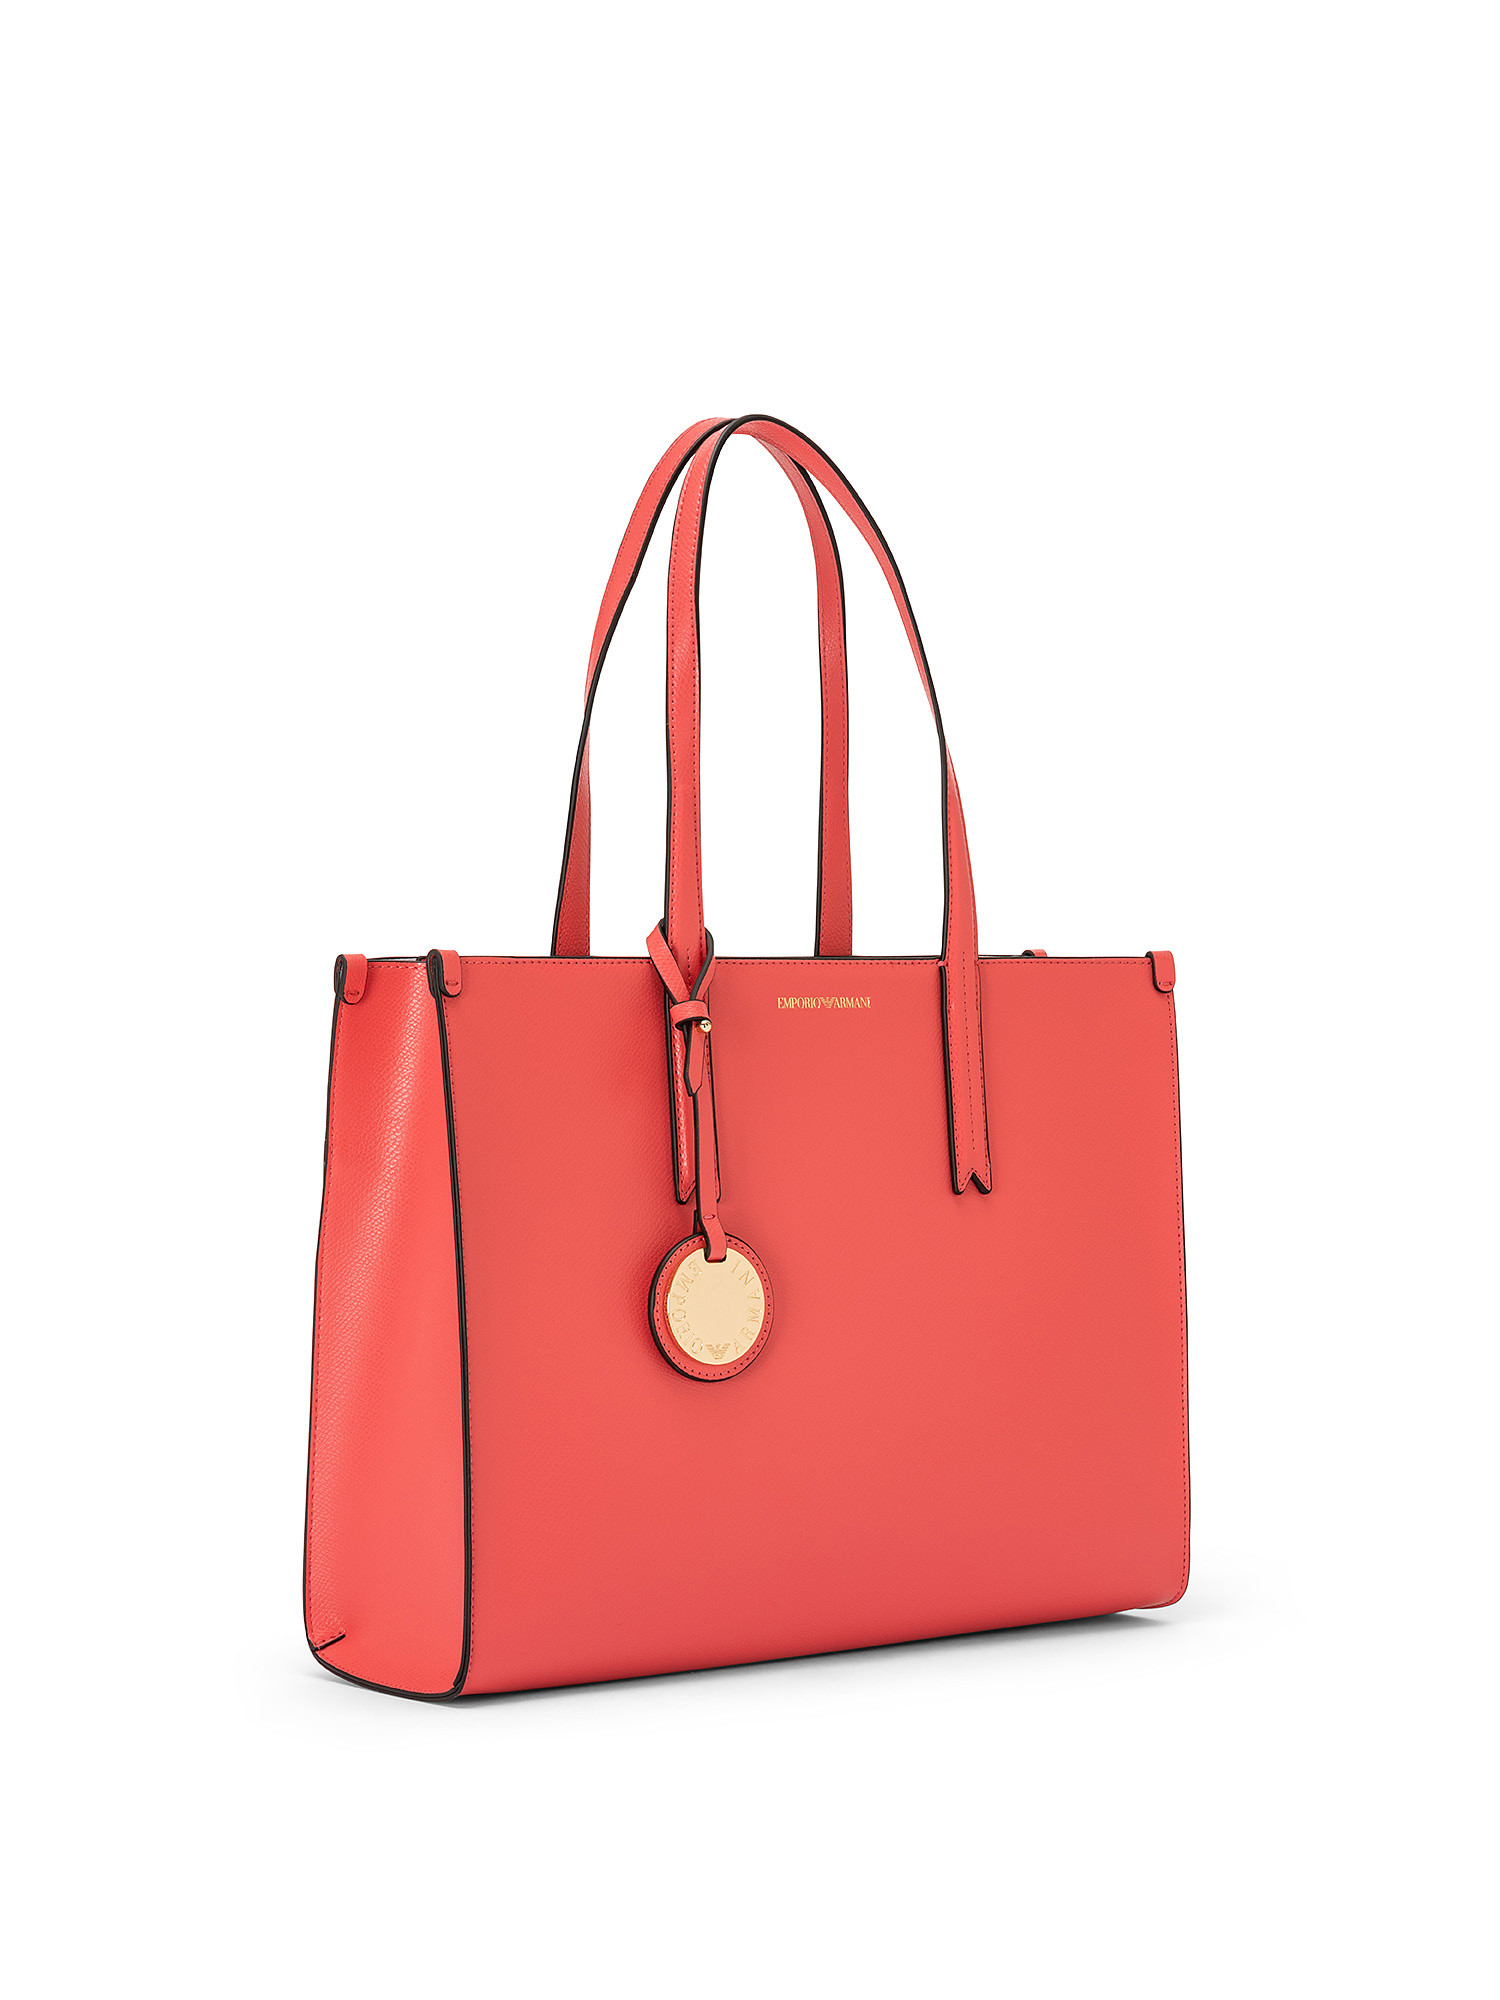 Shopping bag, Coral Red, large image number 1